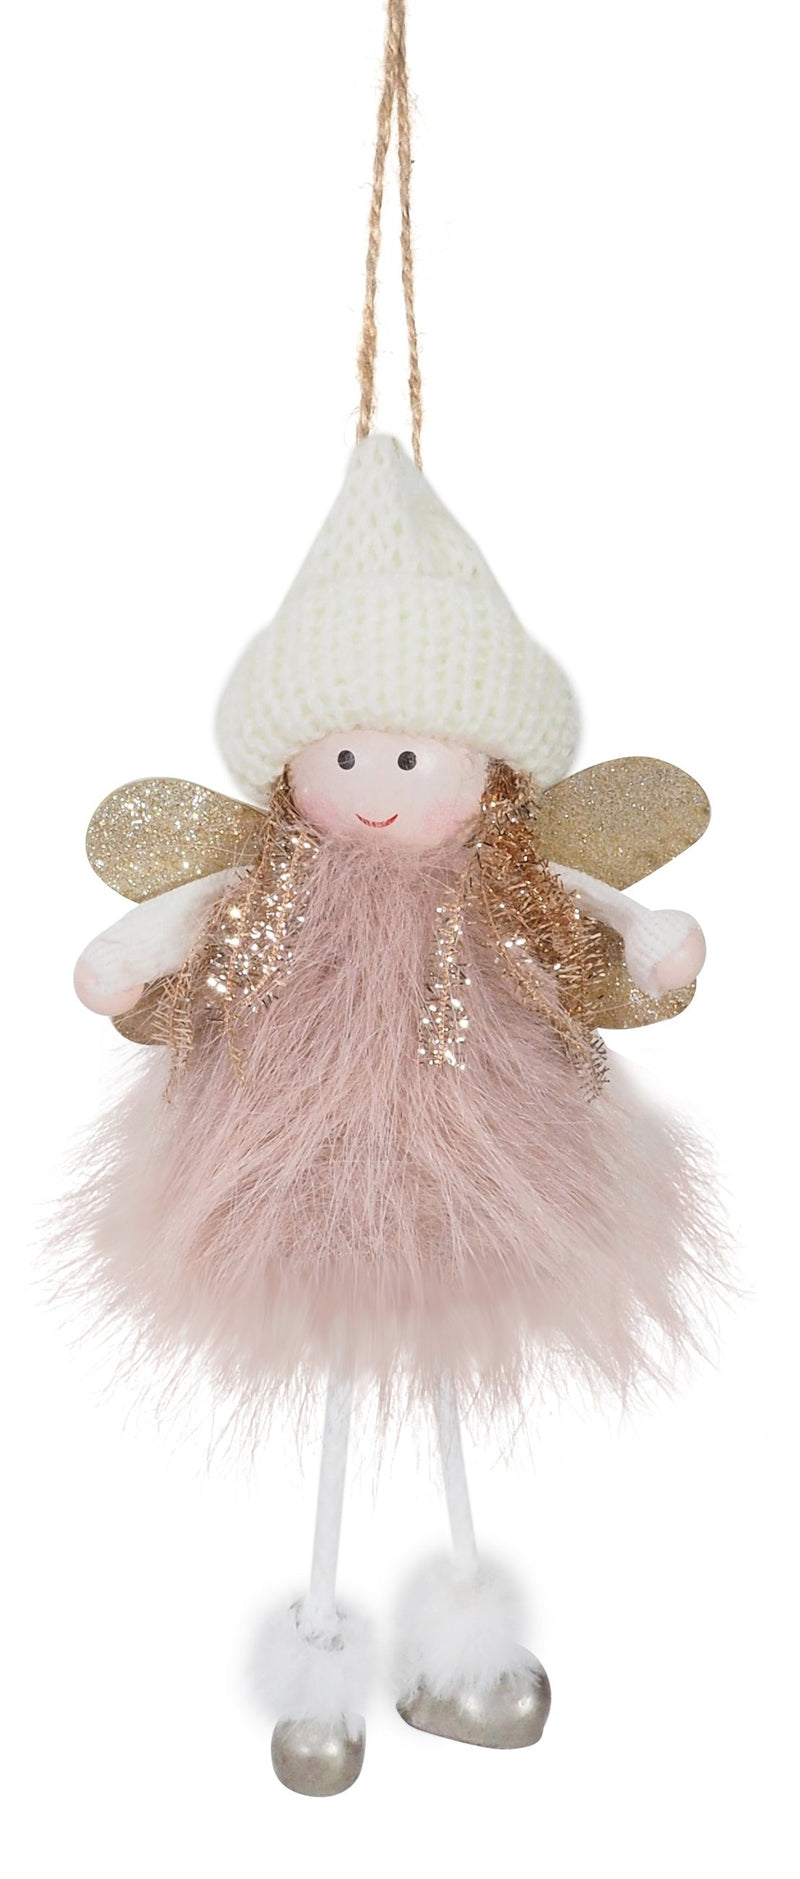 COMING SOON - HANGING NORDIC FAIRY